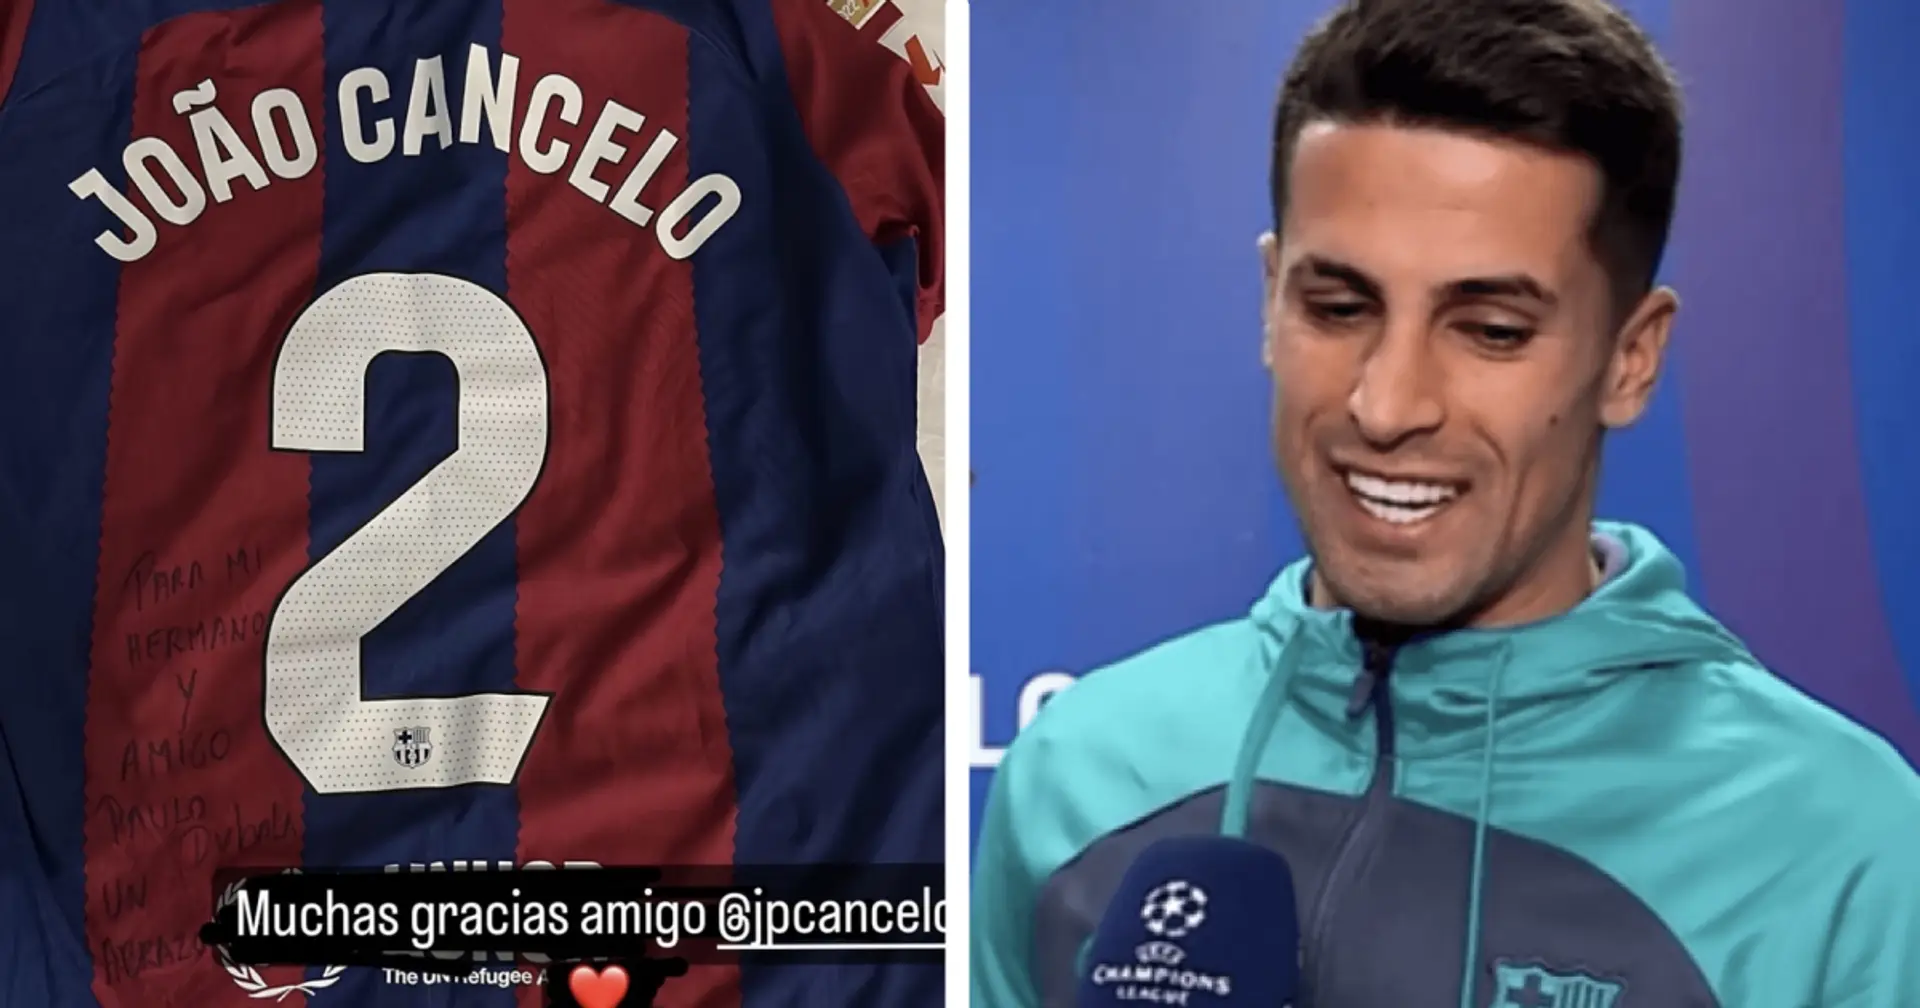 Cancelo gifts jersey to star player who 'offered himself to Barca' last year